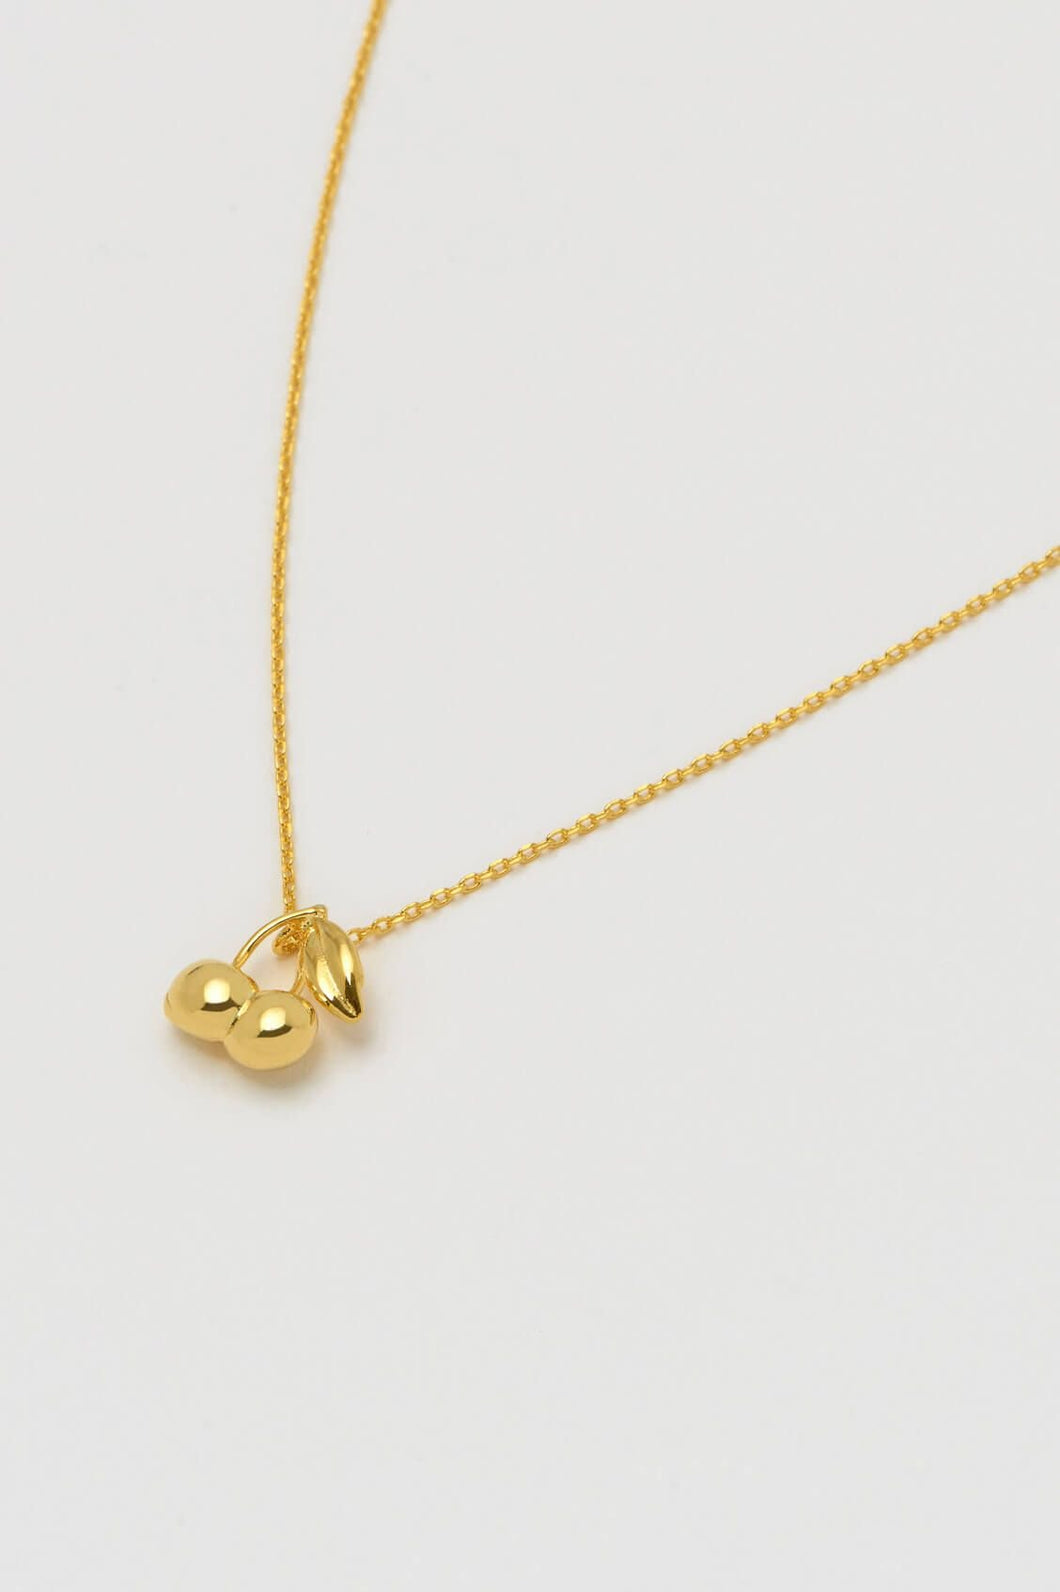 Cherries Pendant Necklace Gold Plated